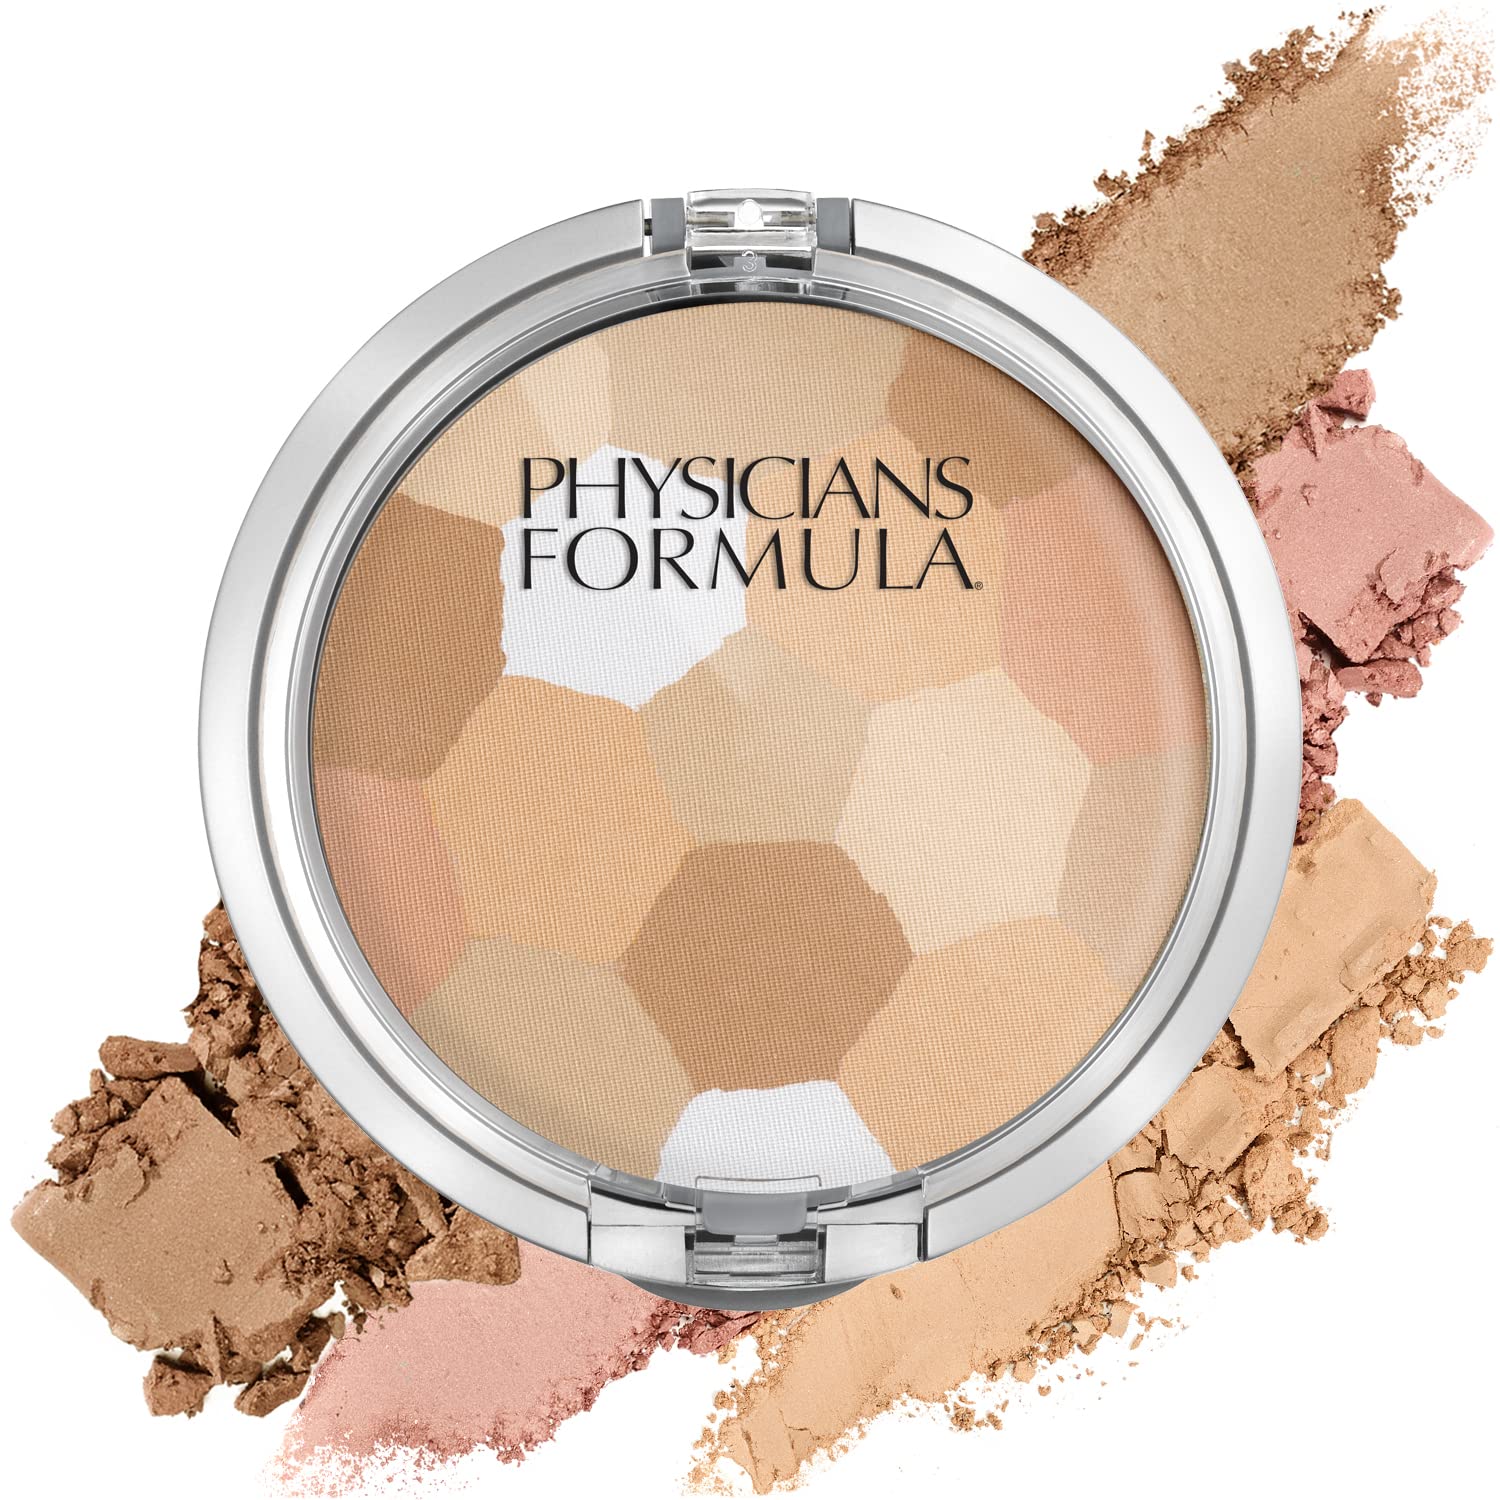 Physicians Formula Setting Powder Palette Multi-Colored Pressed Finishing Powder, Natural Coverage, Buff, Dermatologist Tested, Clinicially Tested